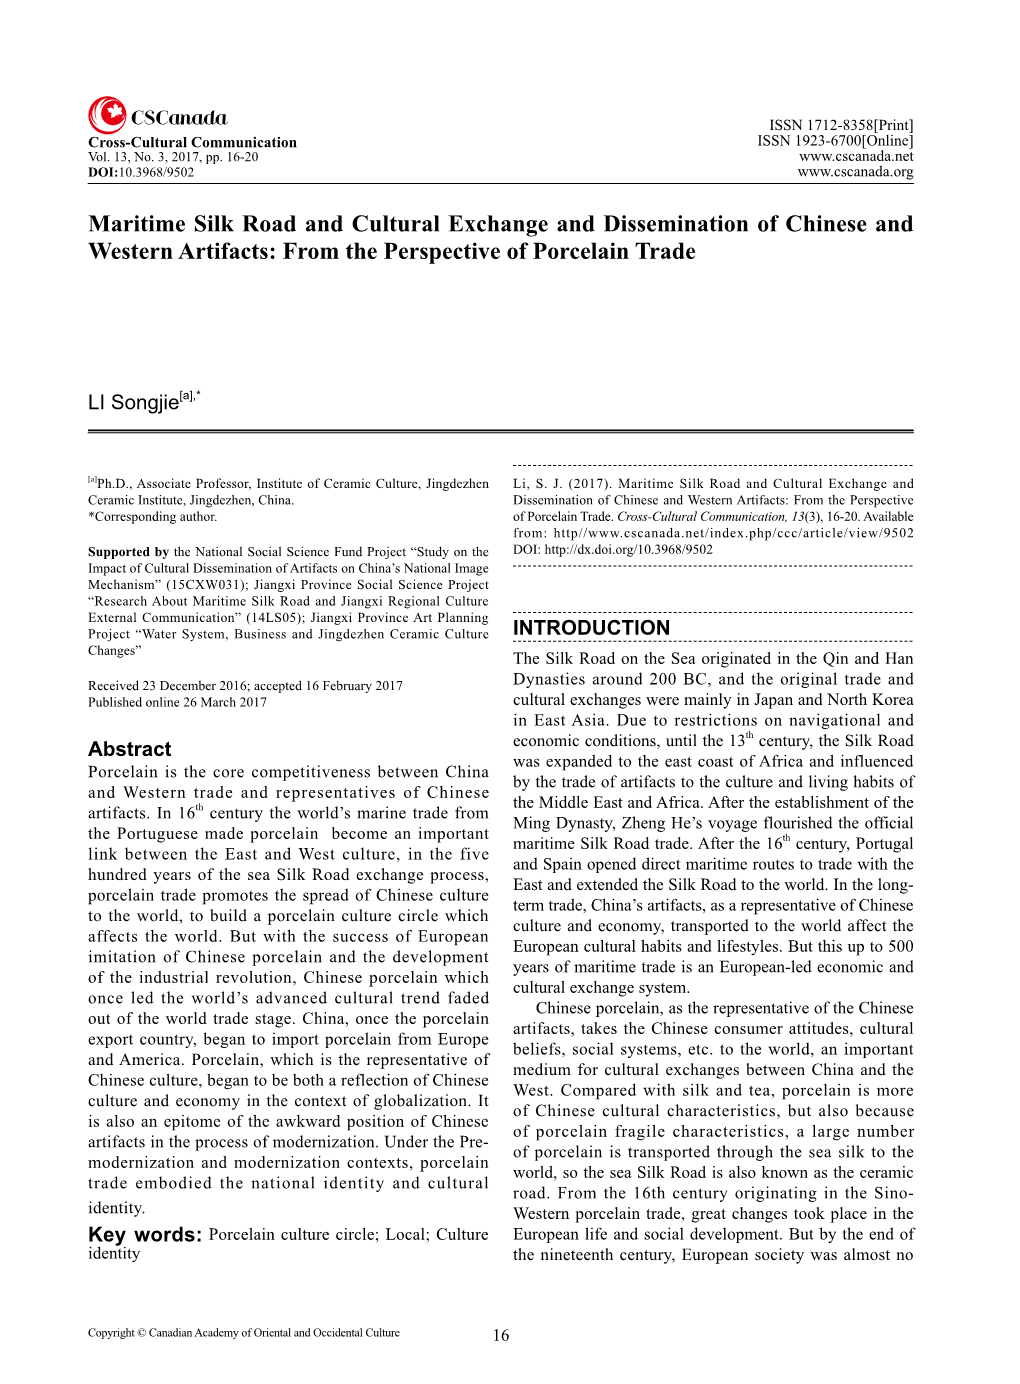 Maritime Silk Road and Cultural Exchange and Dissemination of Chinese and Western Artifacts: from the Perspective of Porcelain Trade